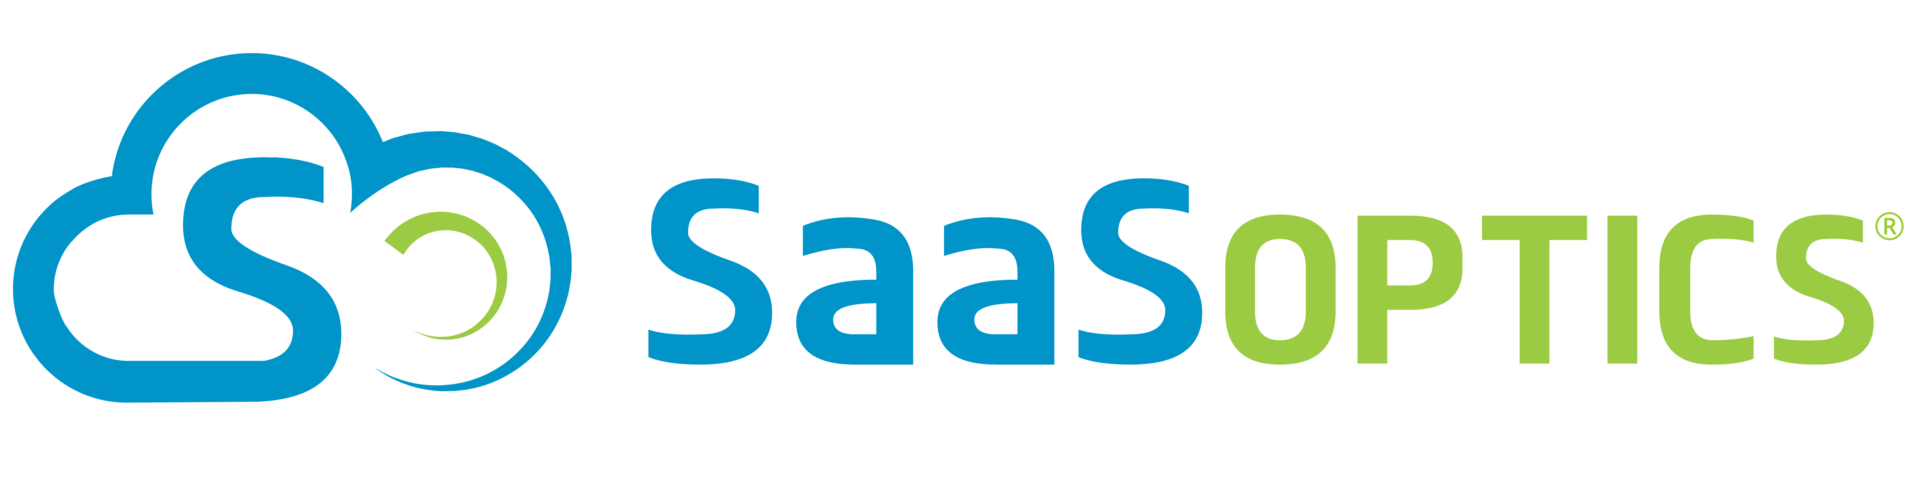 SaaSOptics Posts Record Year With 90 Percent Growth in 2018, Announces New Executives